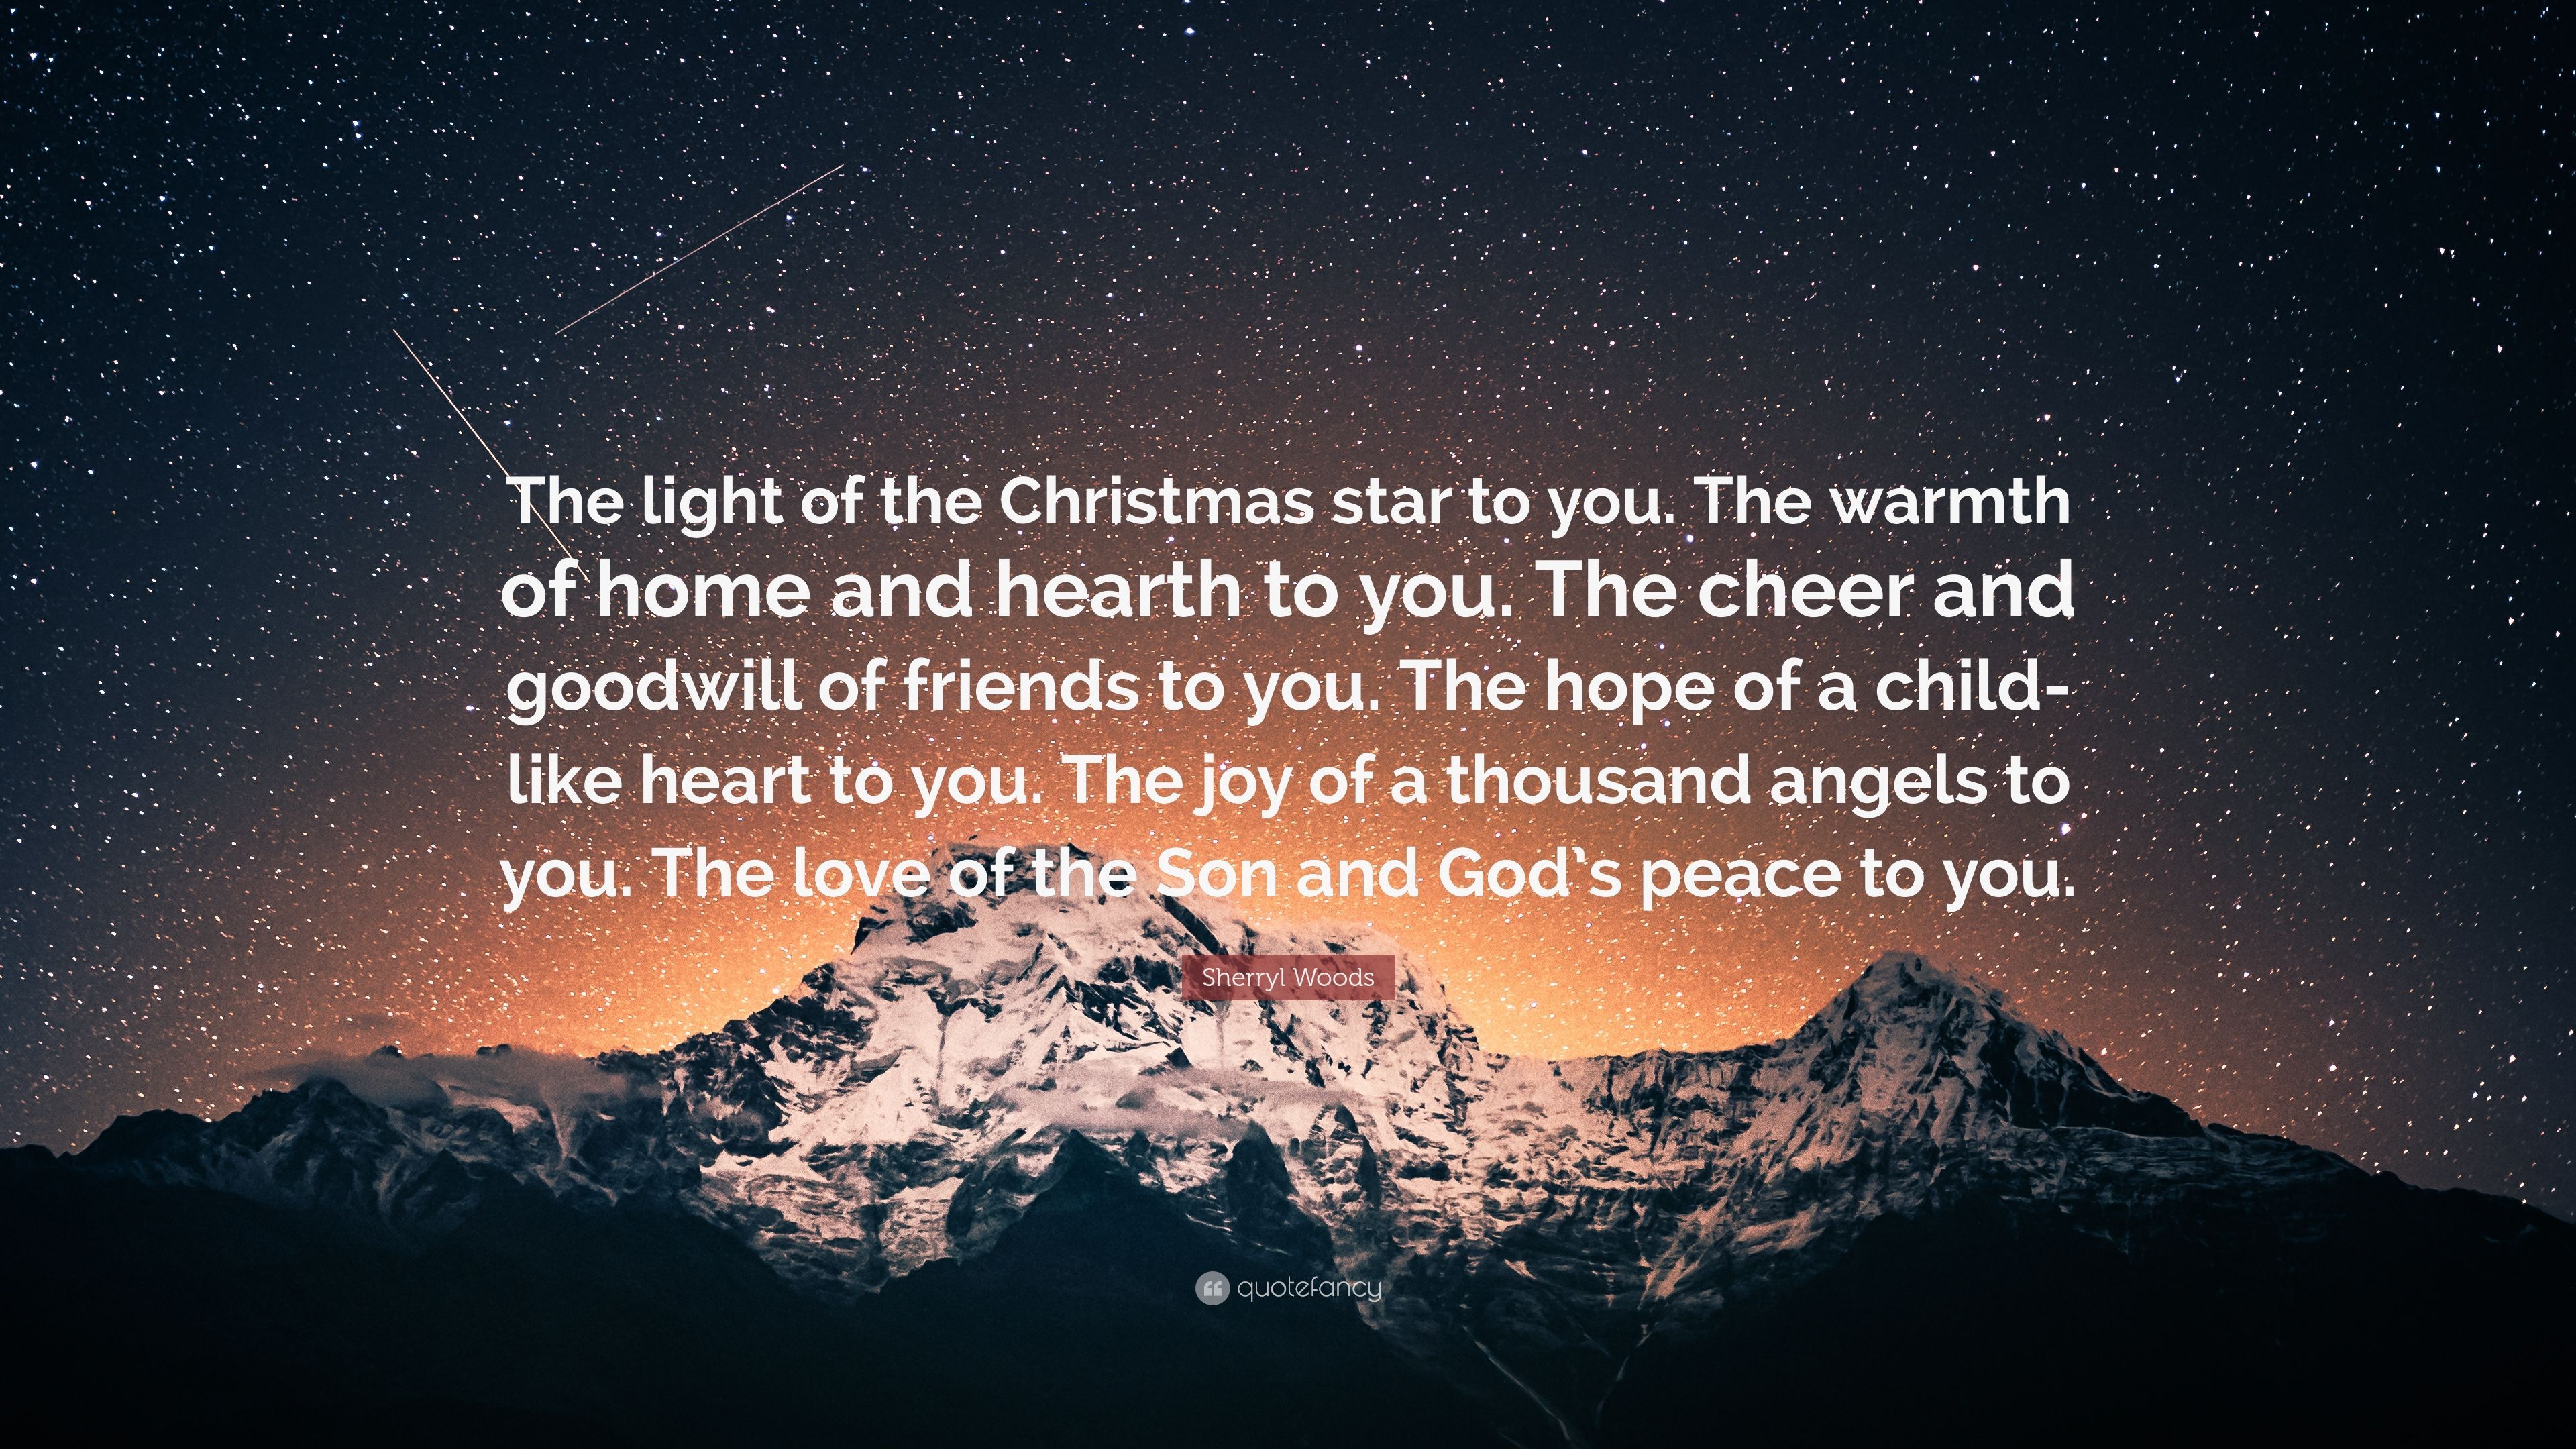 Sherryl Woods Quote: “The light of the Christmas star to you